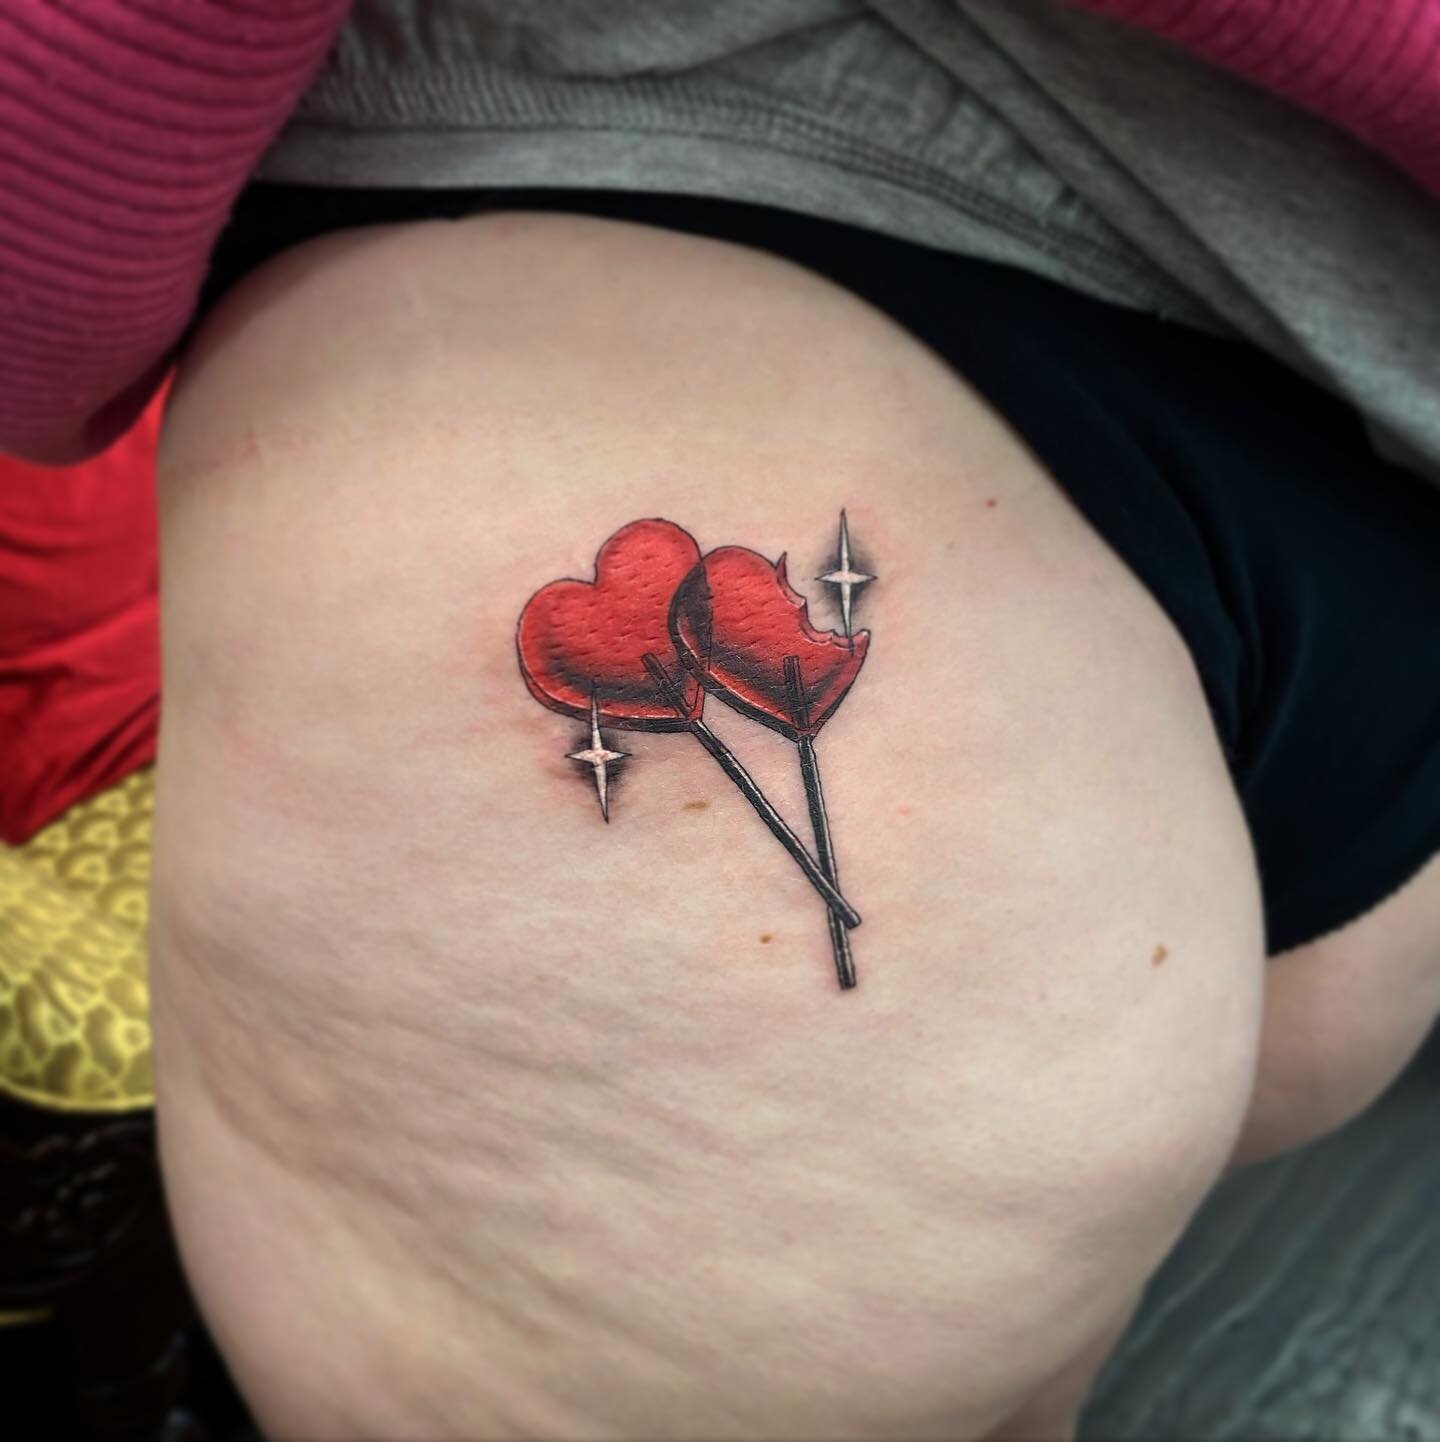 🍭❤️ Heart Lollipops for Alex!❤️🍭 One from my recent flash, thanks again! Was lovely to meet you. 🥰 @stencil.jam @kwadron @rawpigments @drmorsetattoo #tattoo #tattooartist #femaletattooartist #ladytattooer #nztattoo #wellingtontattoo #wellington #d